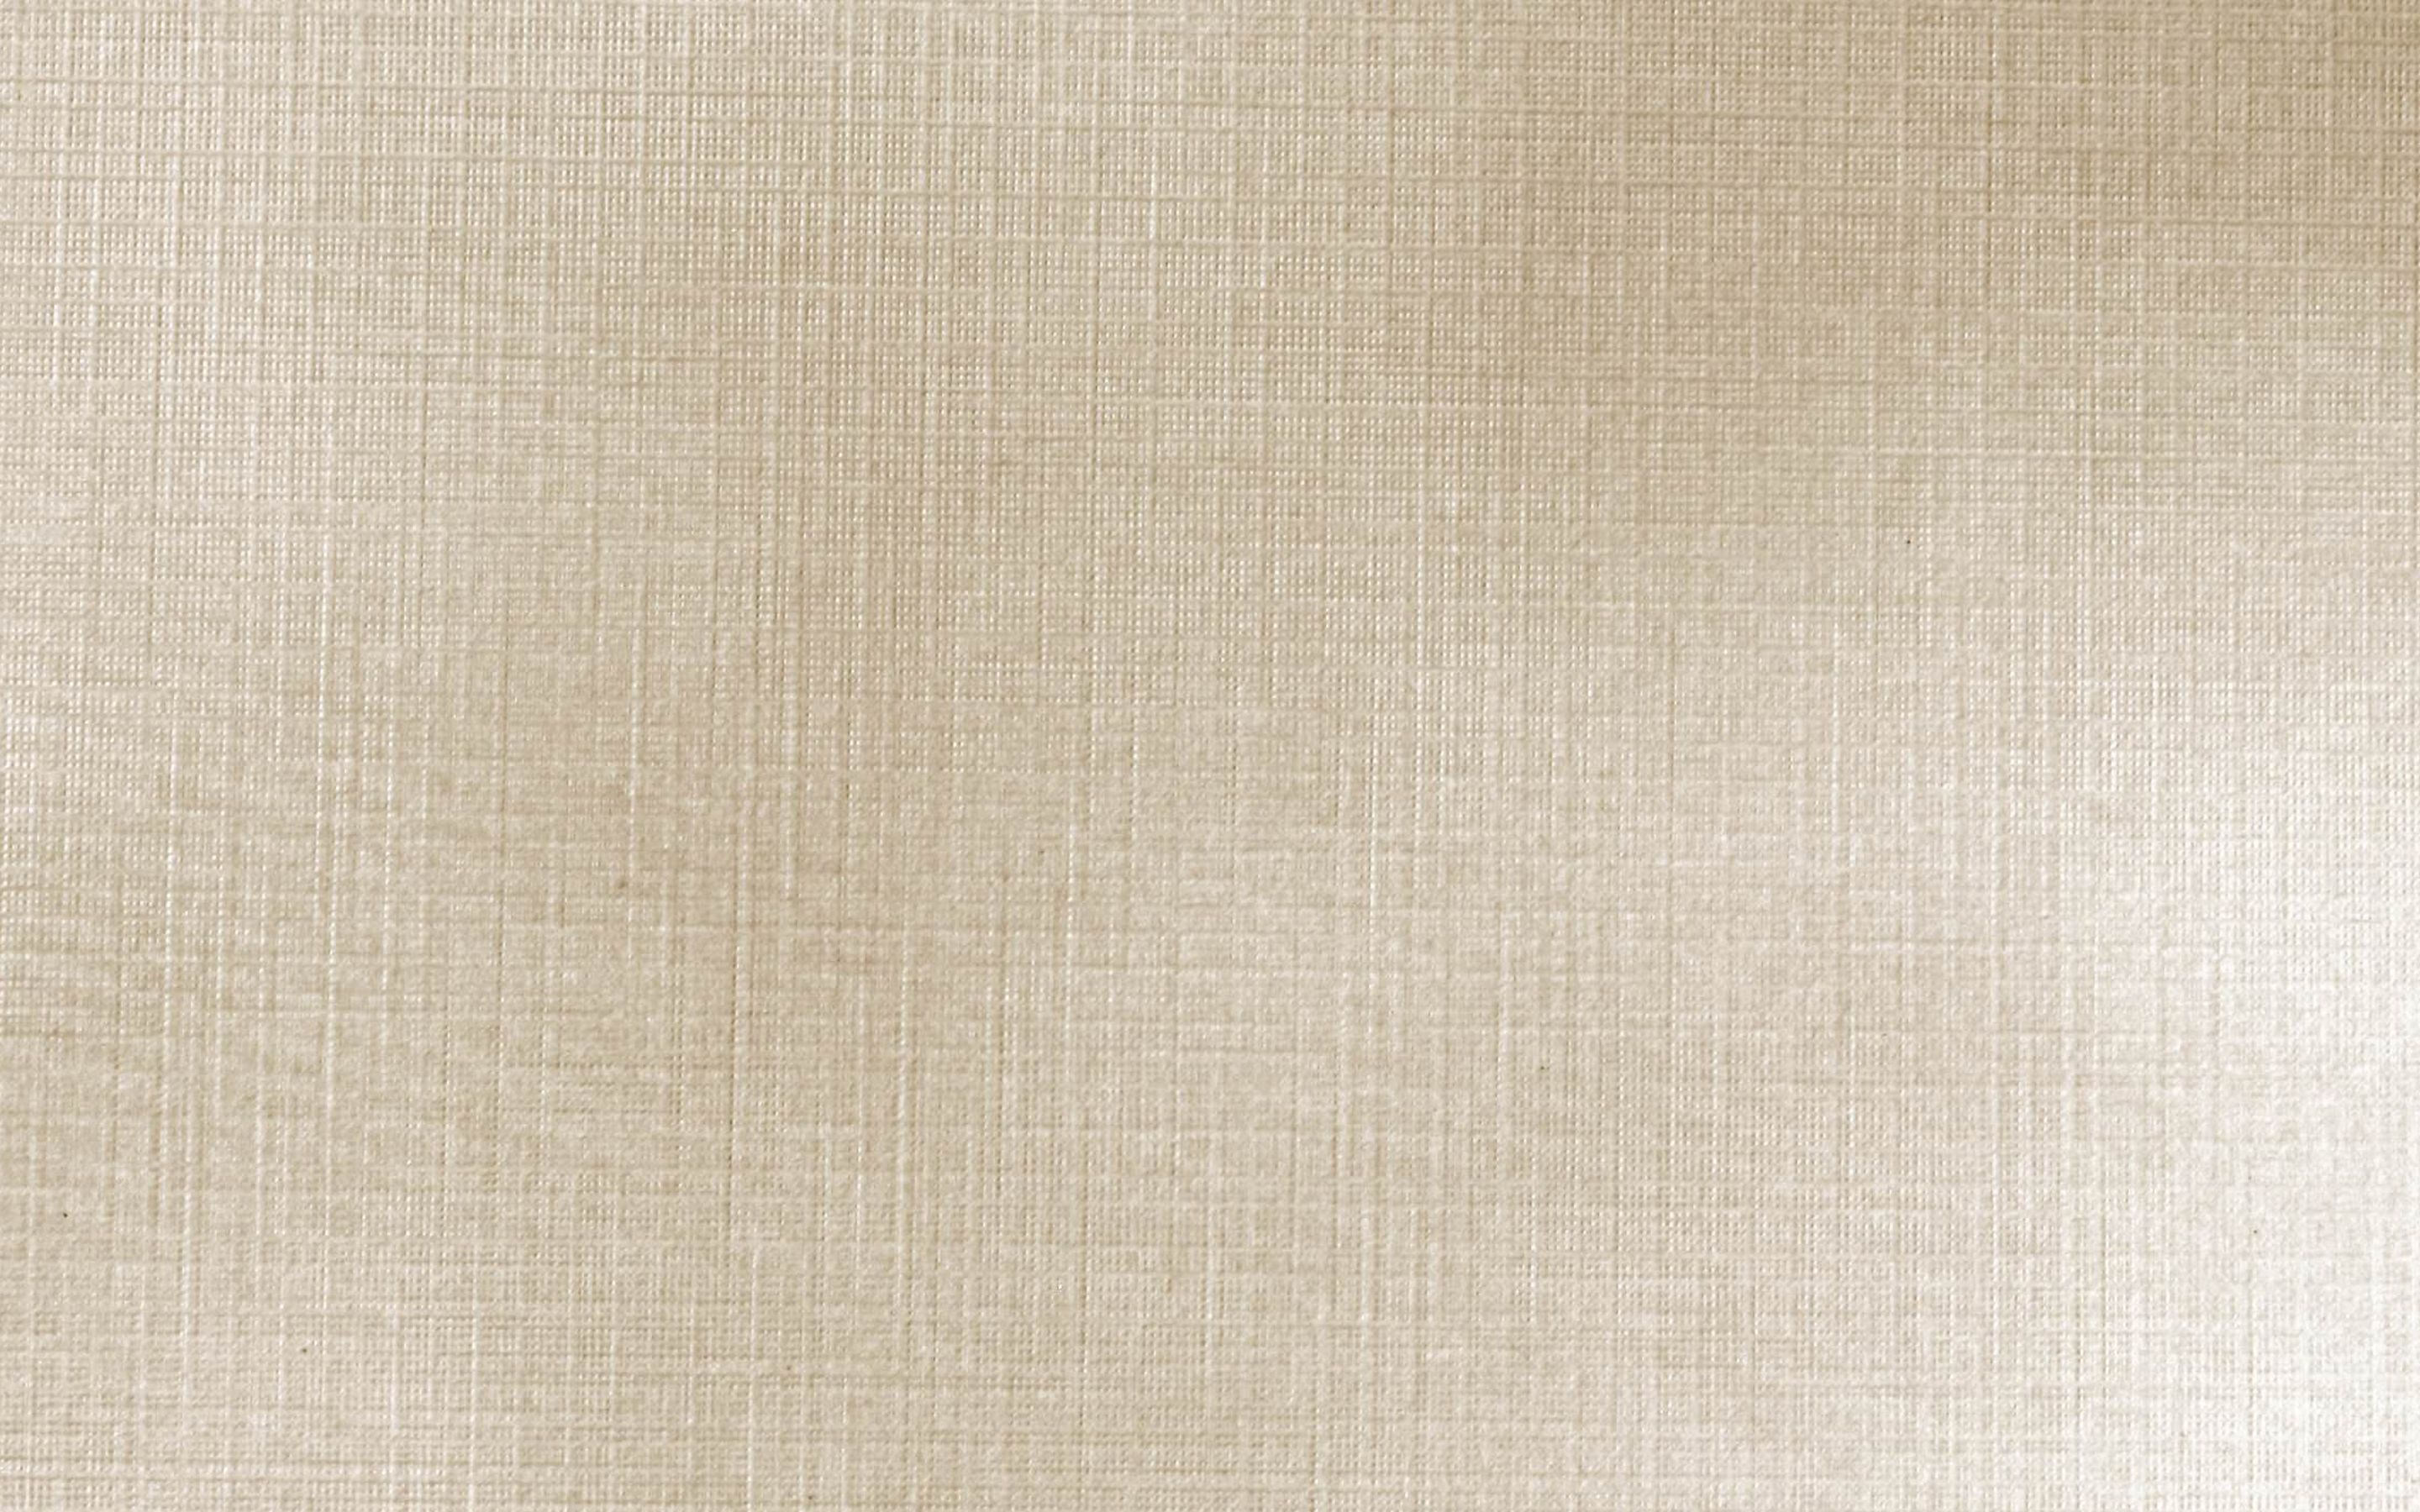 Download wallpaper beige paper texture, paper texture with a pattern, beige paper background, beige wallpaper texture for desktop with resolution 2880x1800. High Quality HD picture wallpaper